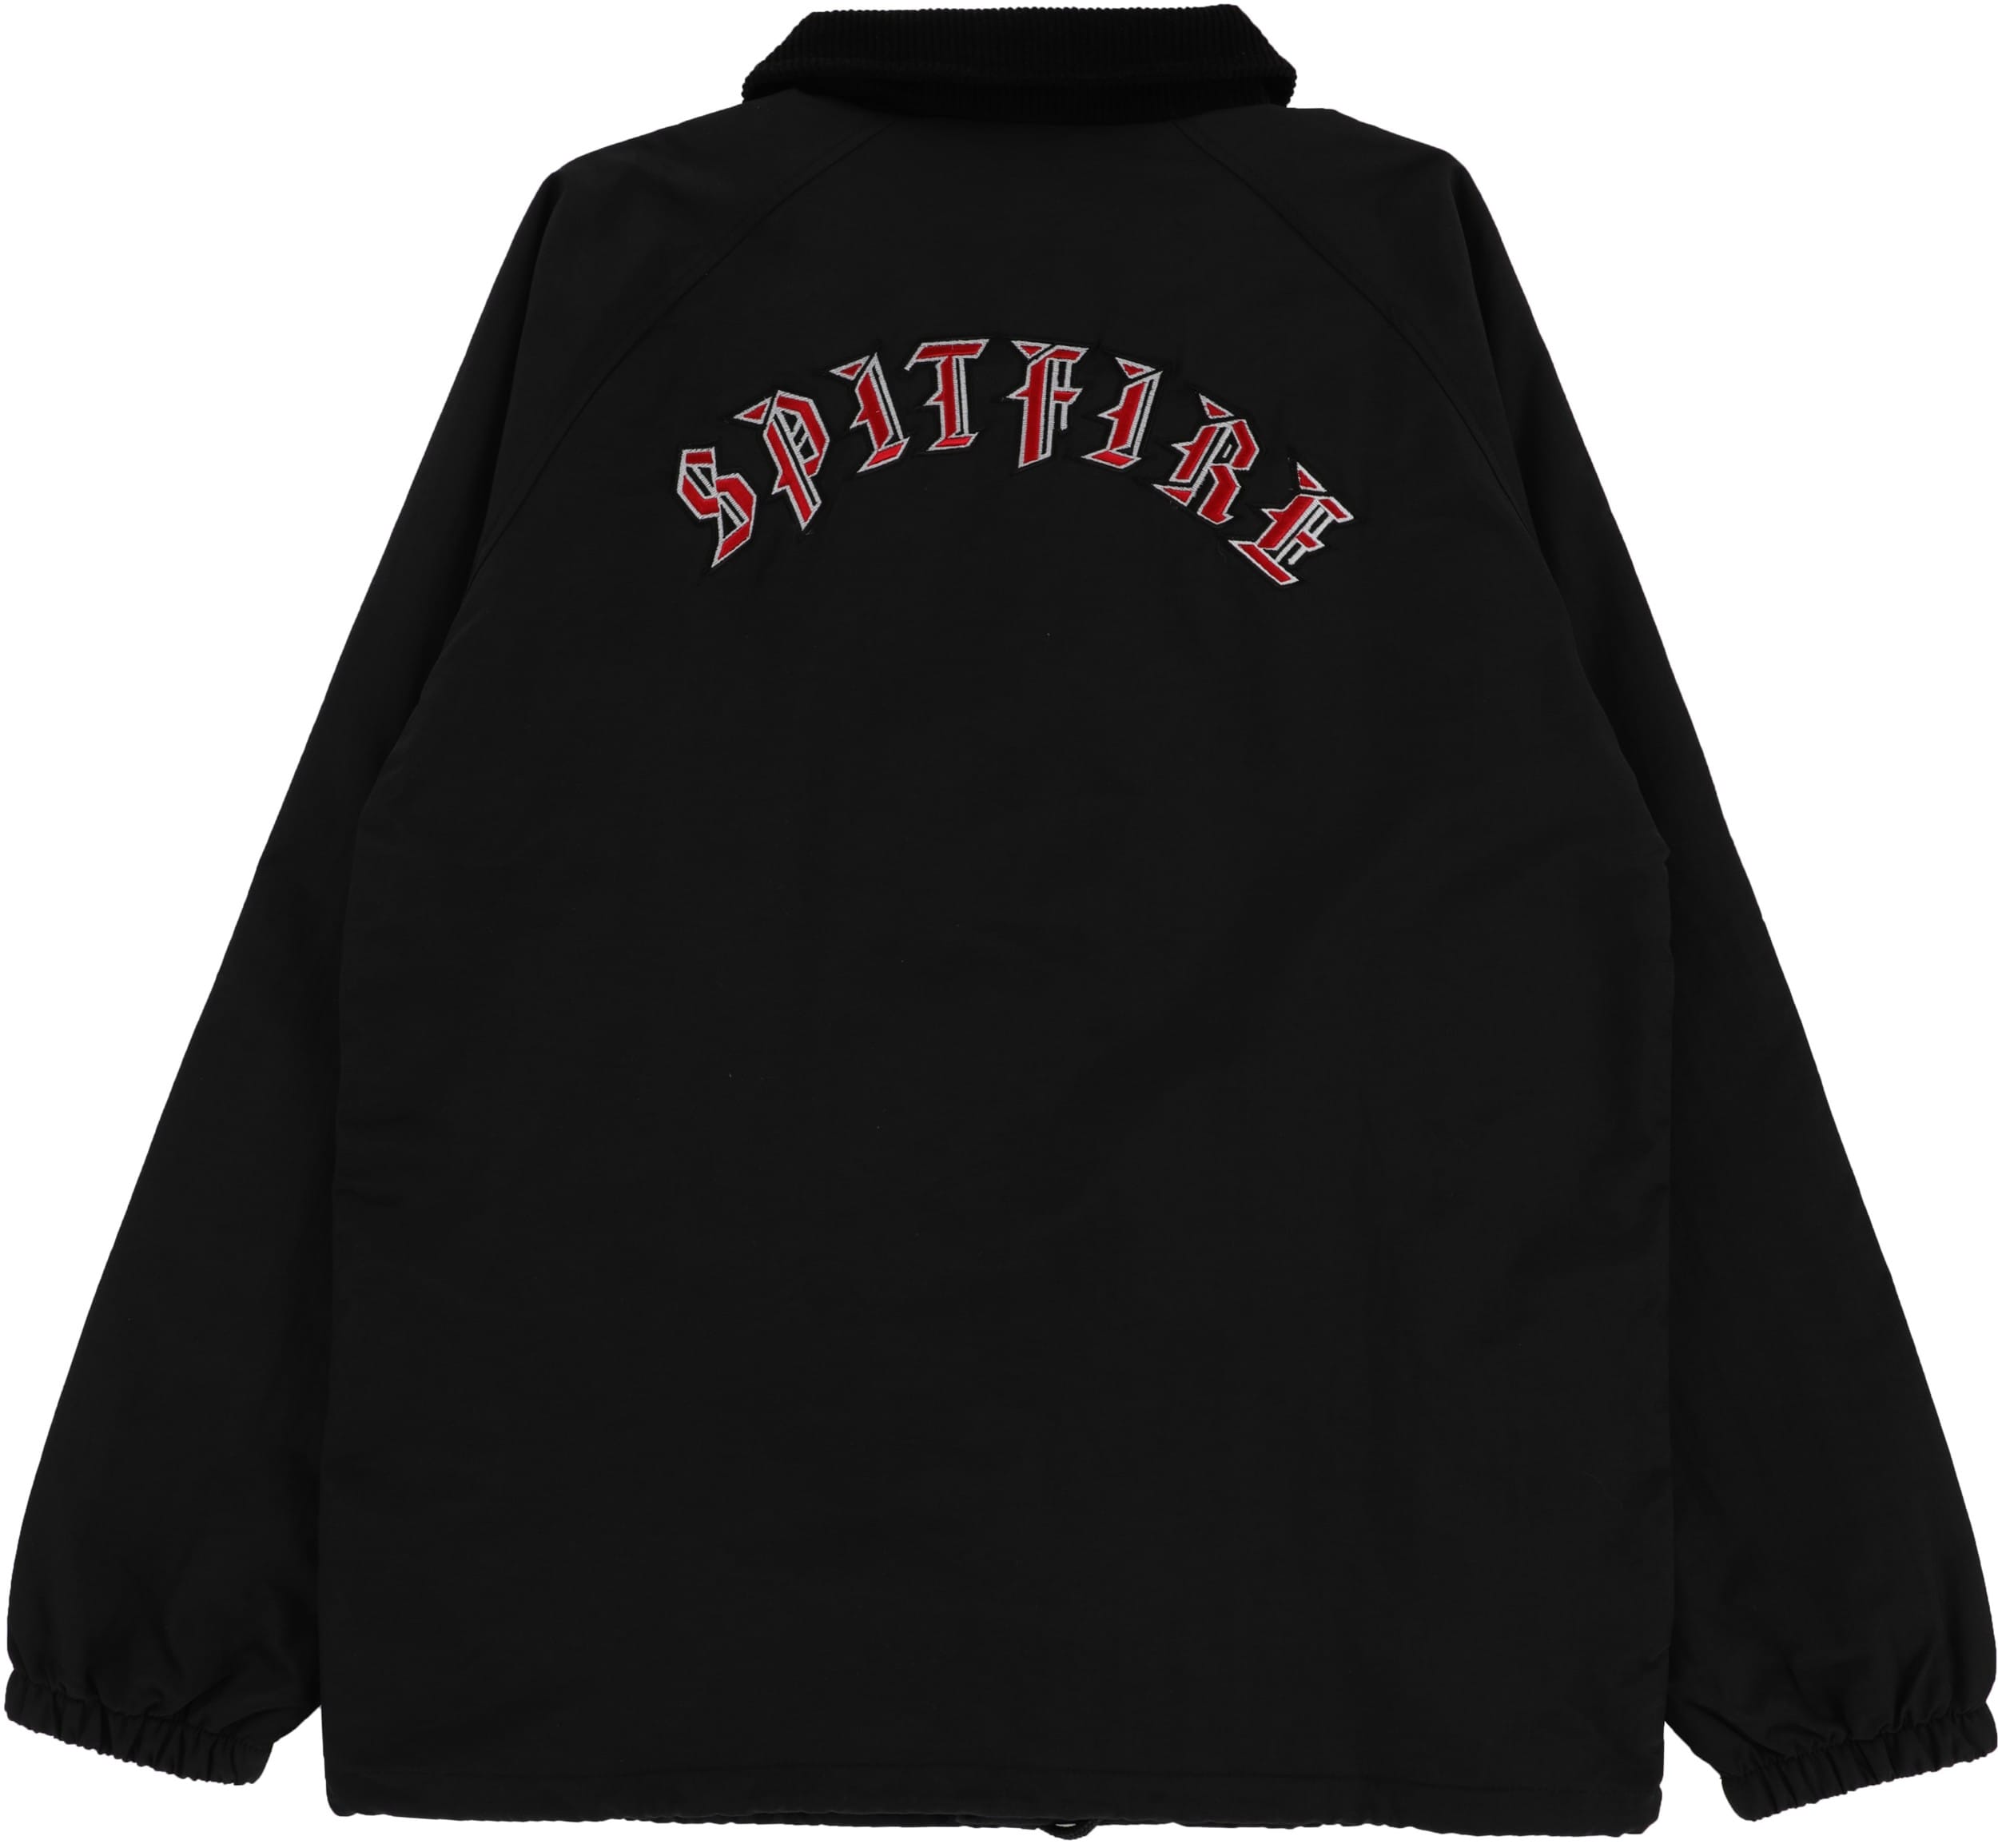 Spitfire Old E Embroidered Jacket - black/red-white | Tactics